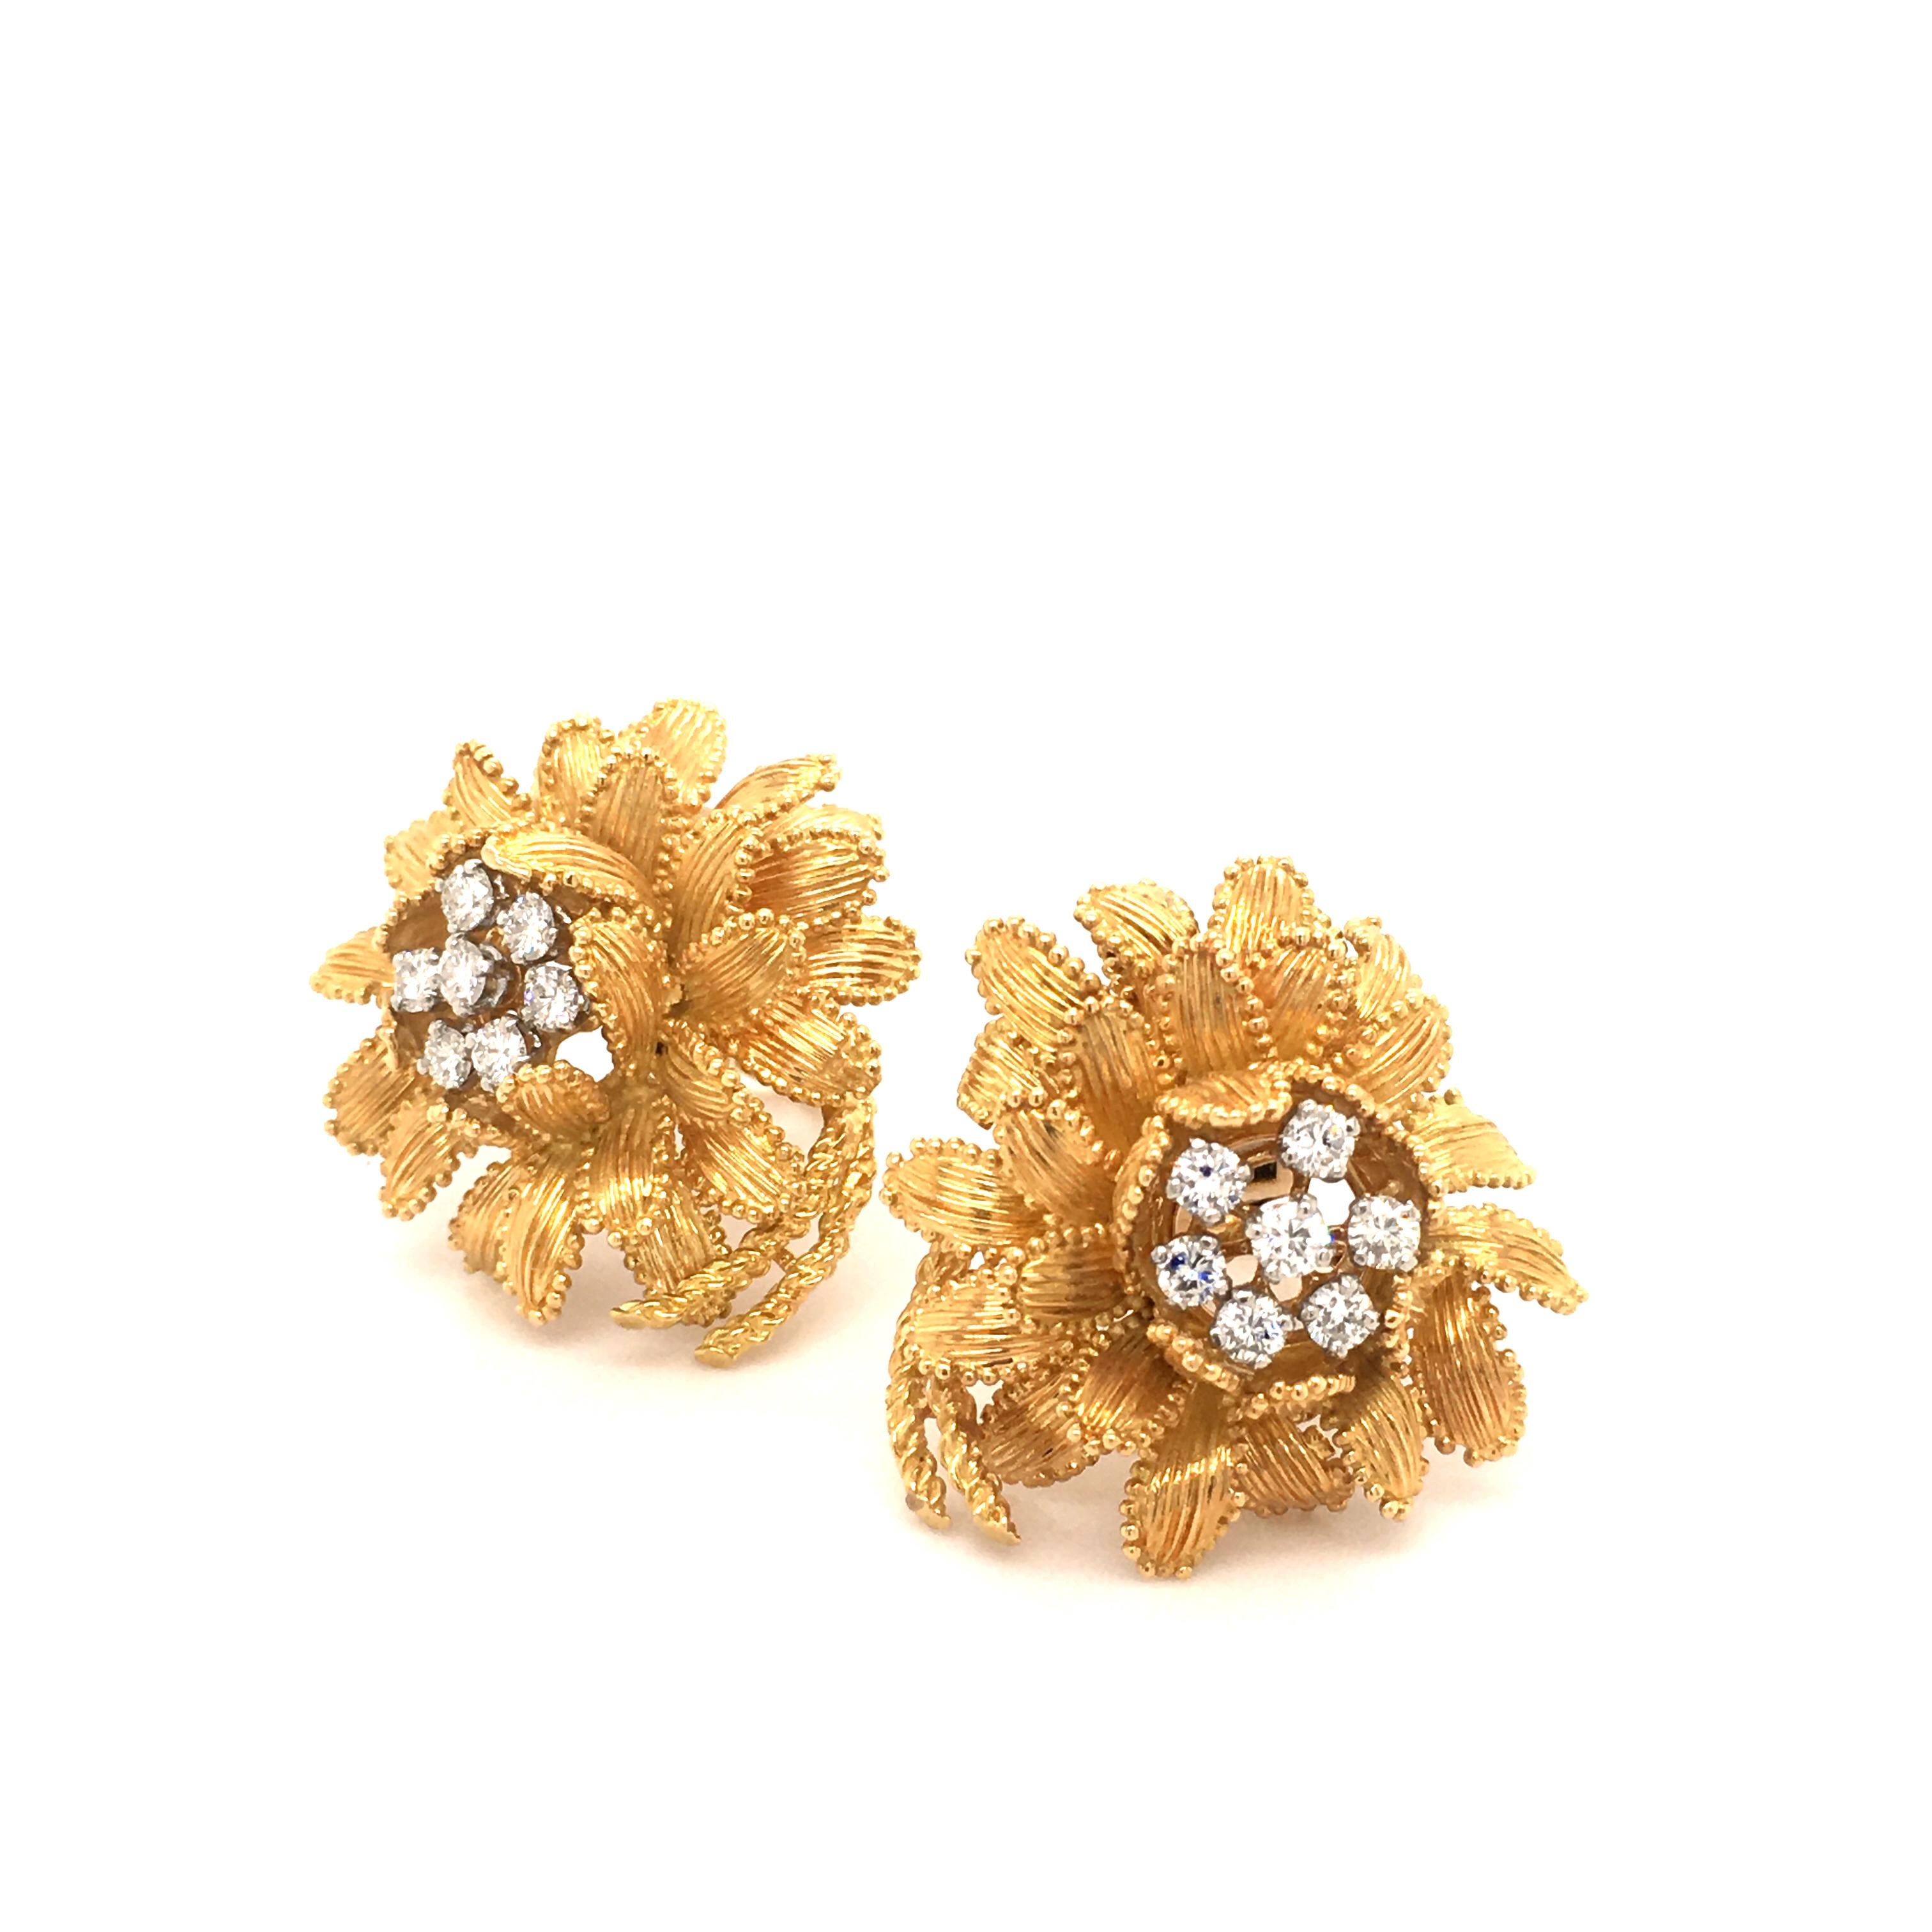 This beautifully handcrafted flower earclips by Gubelin in 18 karat yellow and white gold are prong set with 14 brilliant cut diamonds of G/H color and vs clarity, total weight 0.93 carats. 
Each leaf is carefully bordered by minute granulated